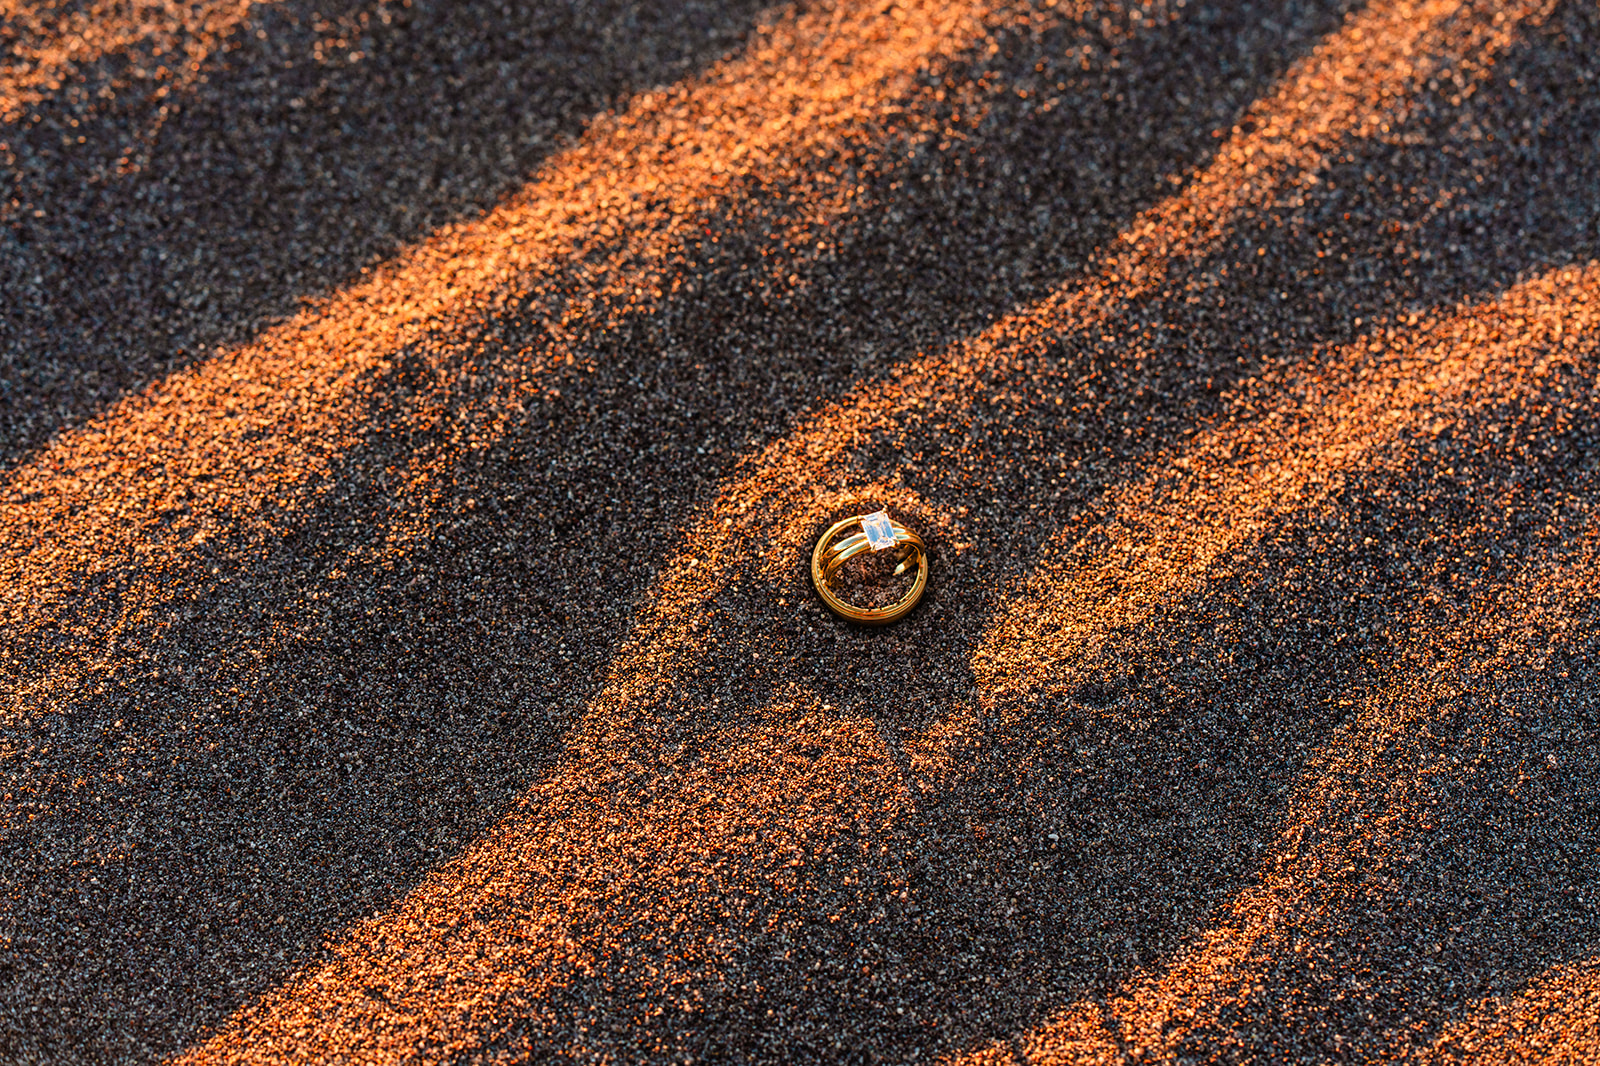 A wedding ring on sand.